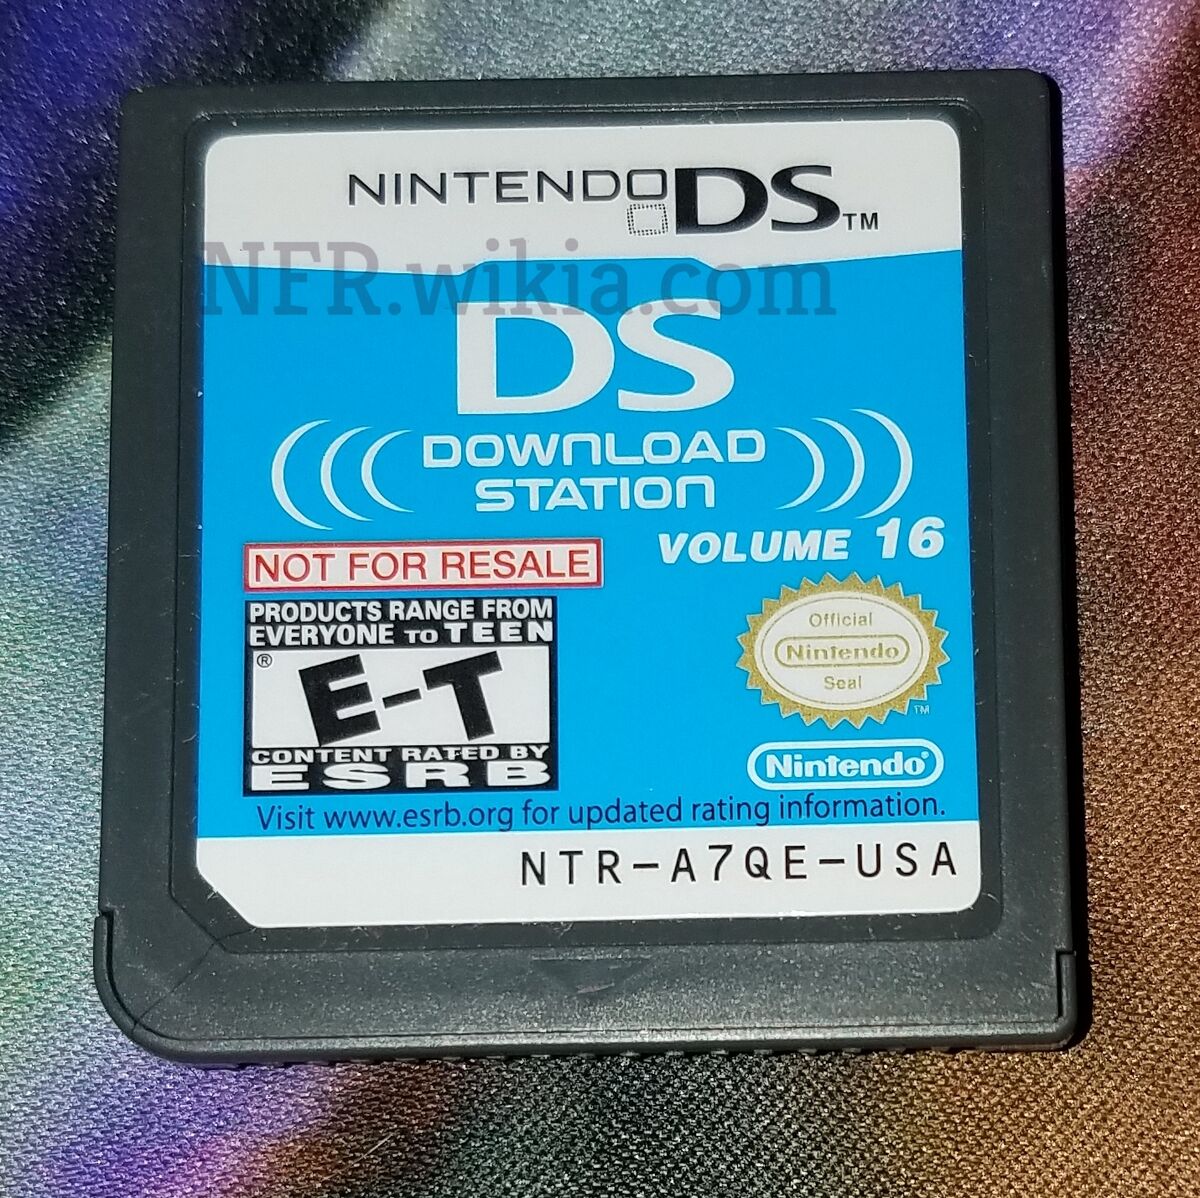 ds download station vol17〜19 各10個　計30個